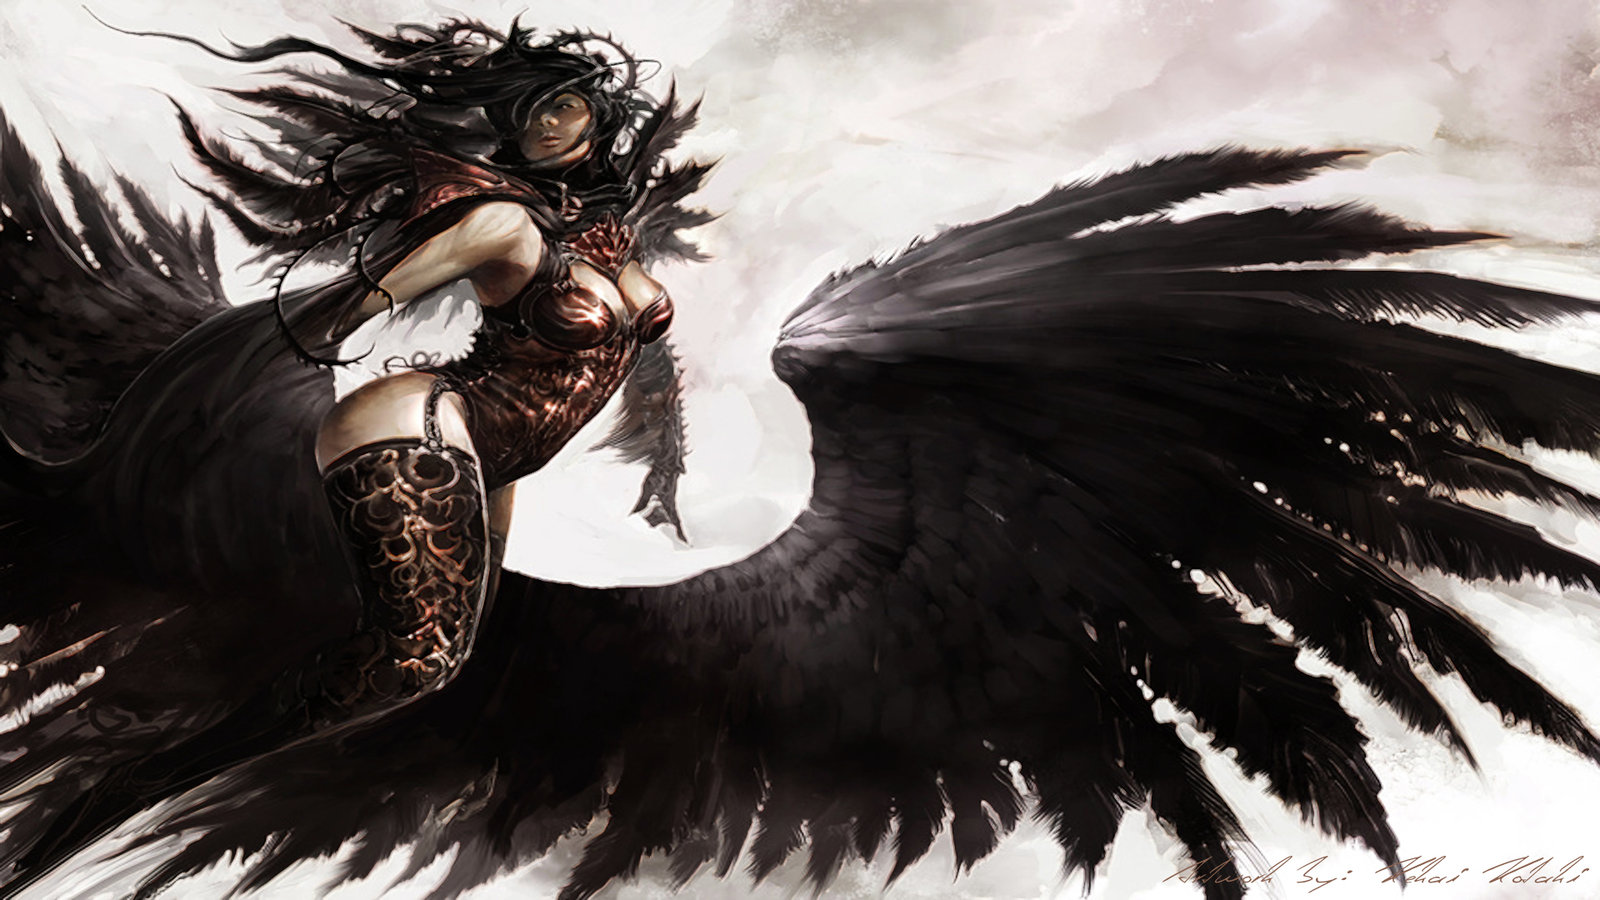 Free Download Gw2 Wallpaper Fly By Angelicbond Customization Images, Photos, Reviews